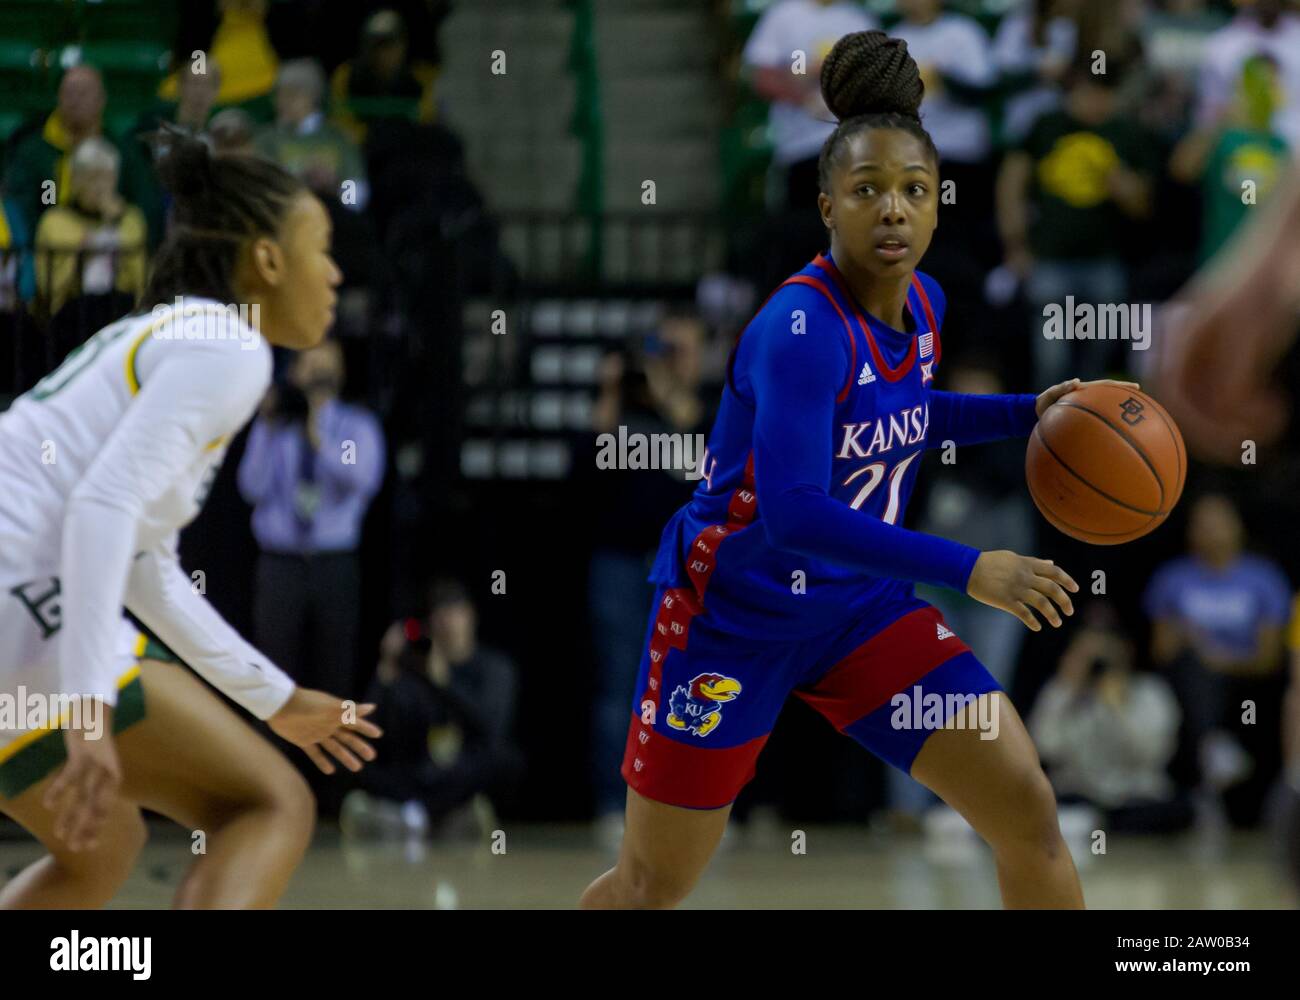 Waco, Texas, USA. 5th Feb, 2020. Kansas Jayhawks guard Chandler Prater (25) dribbles the ball against Baylor Lady Bears guard Juicy Landrum (20) during the 1st half of the NCAA Women's Basketball game between Kansas Jayhawks and the Baylor Lady Bears at The Ferrell Center in Waco, Texas. Matthew Lynch/CSM/Alamy Live News Stock Photo